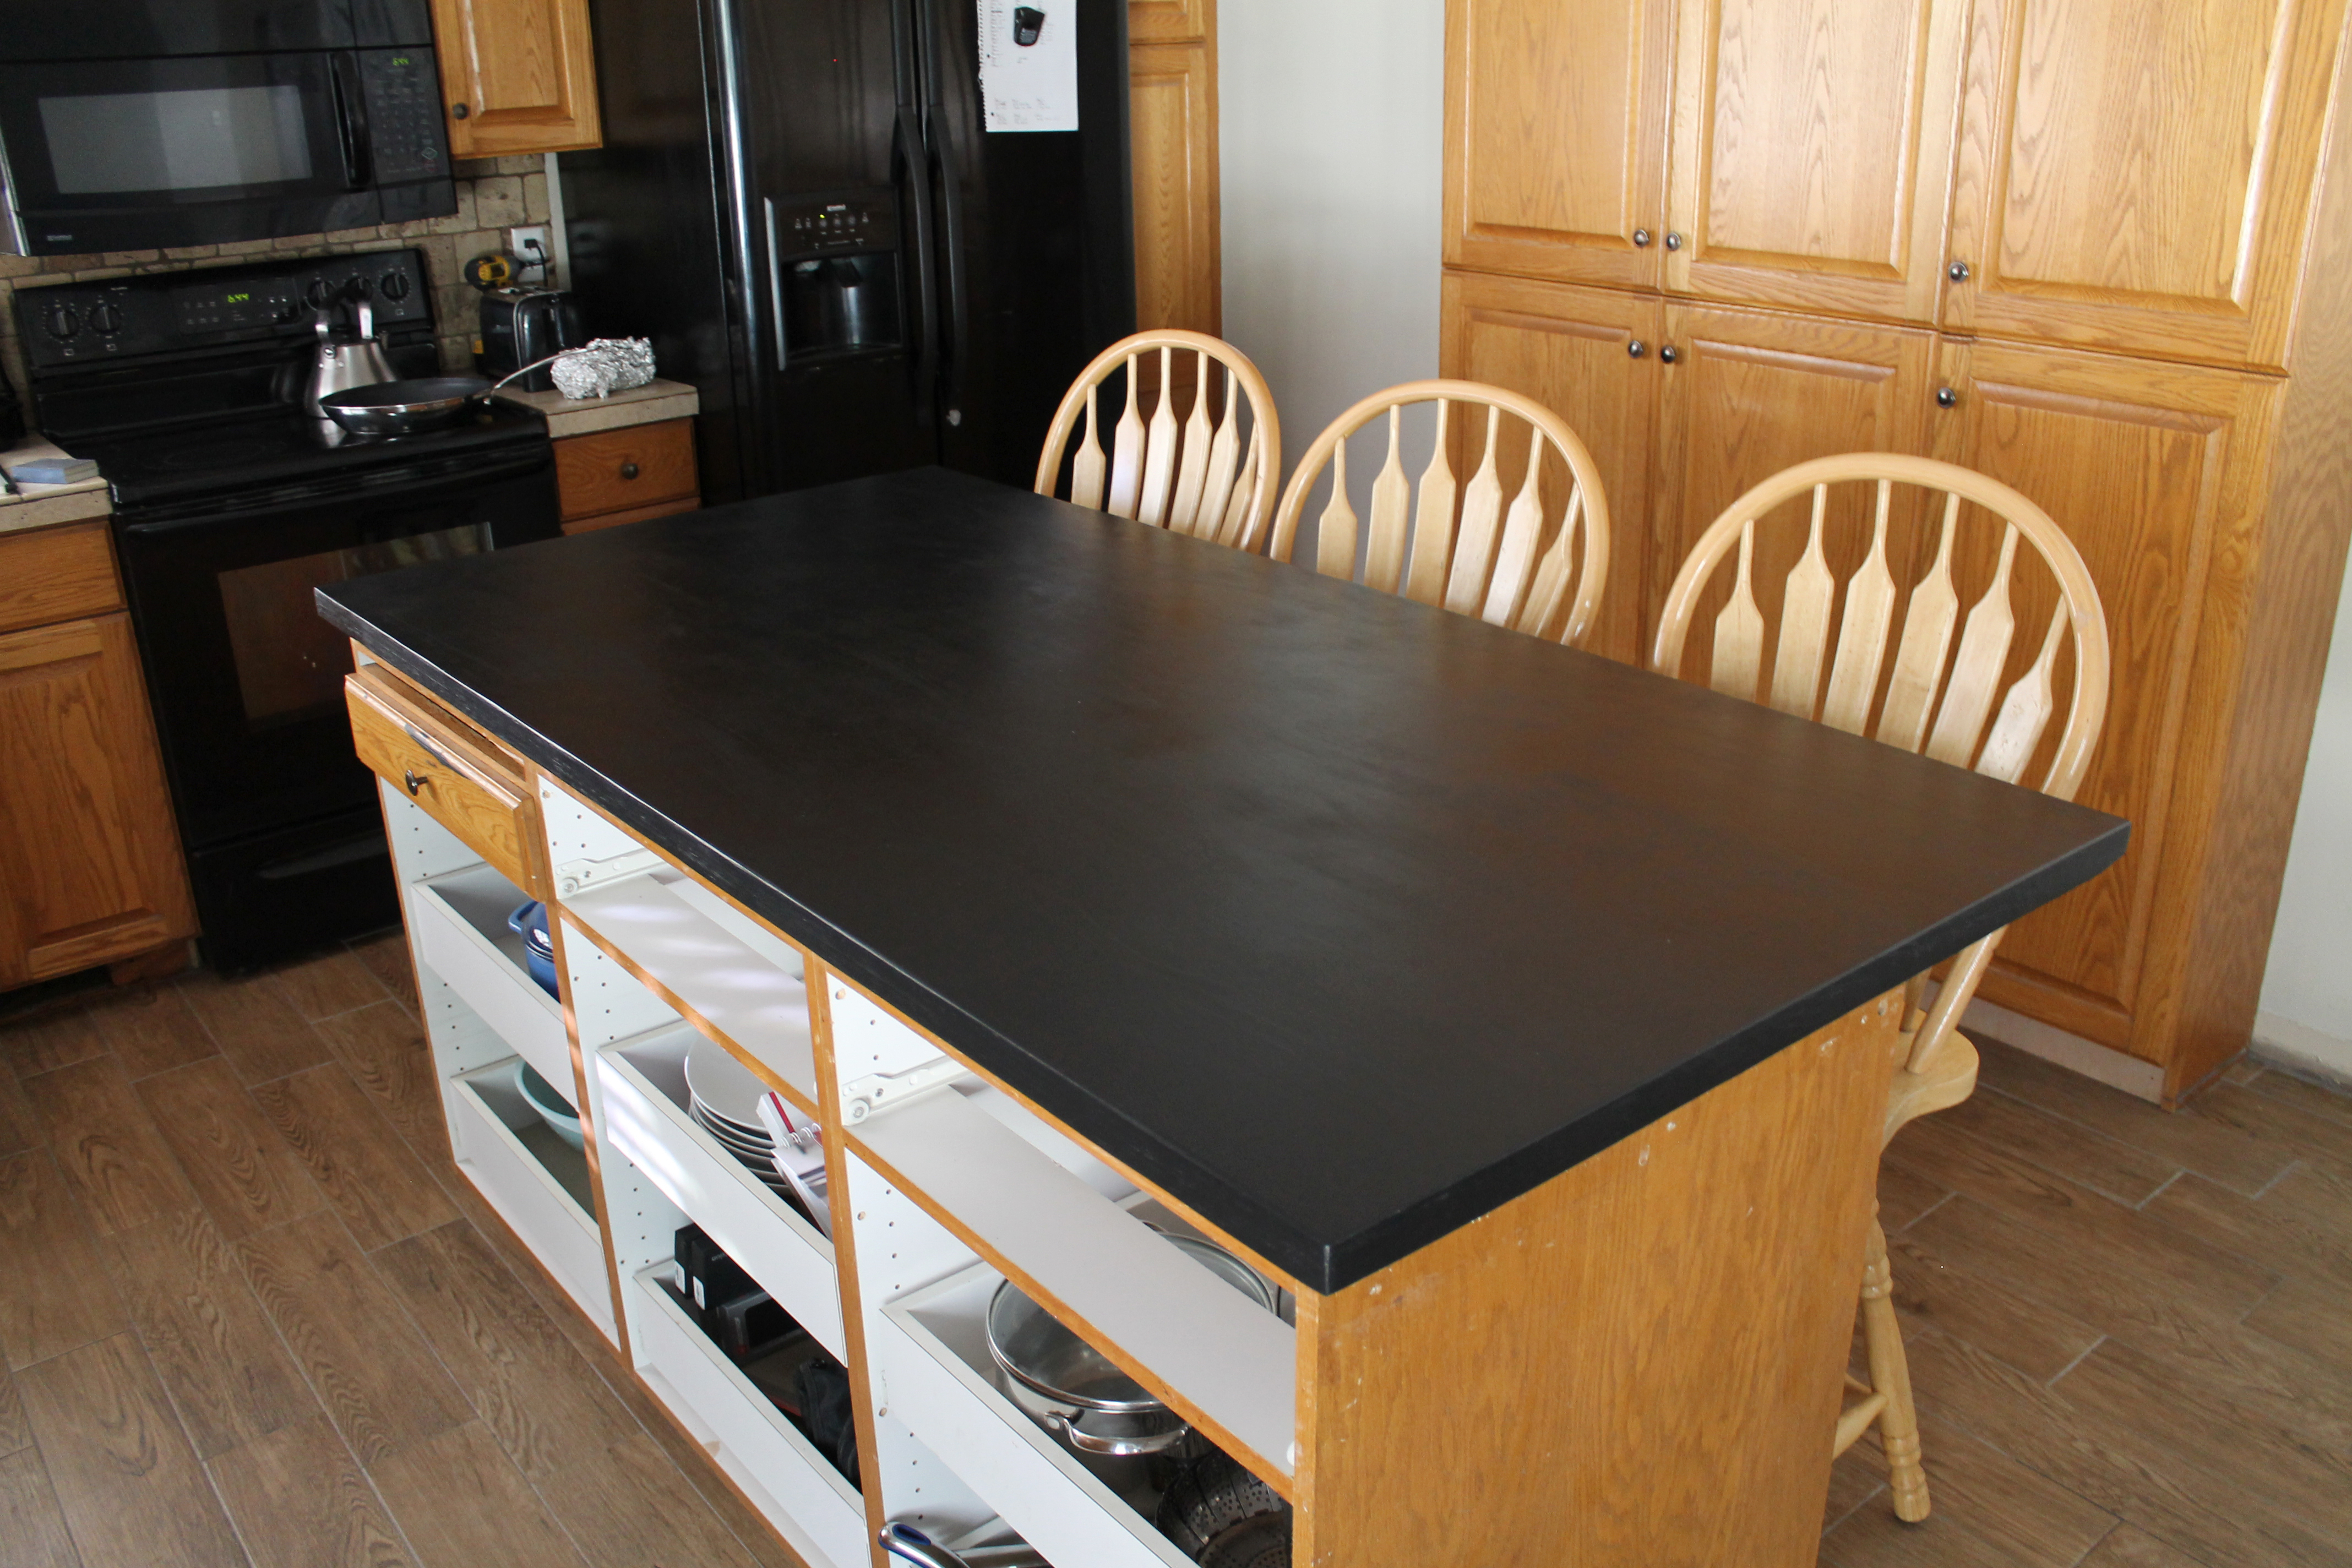 How To Paint Countertops